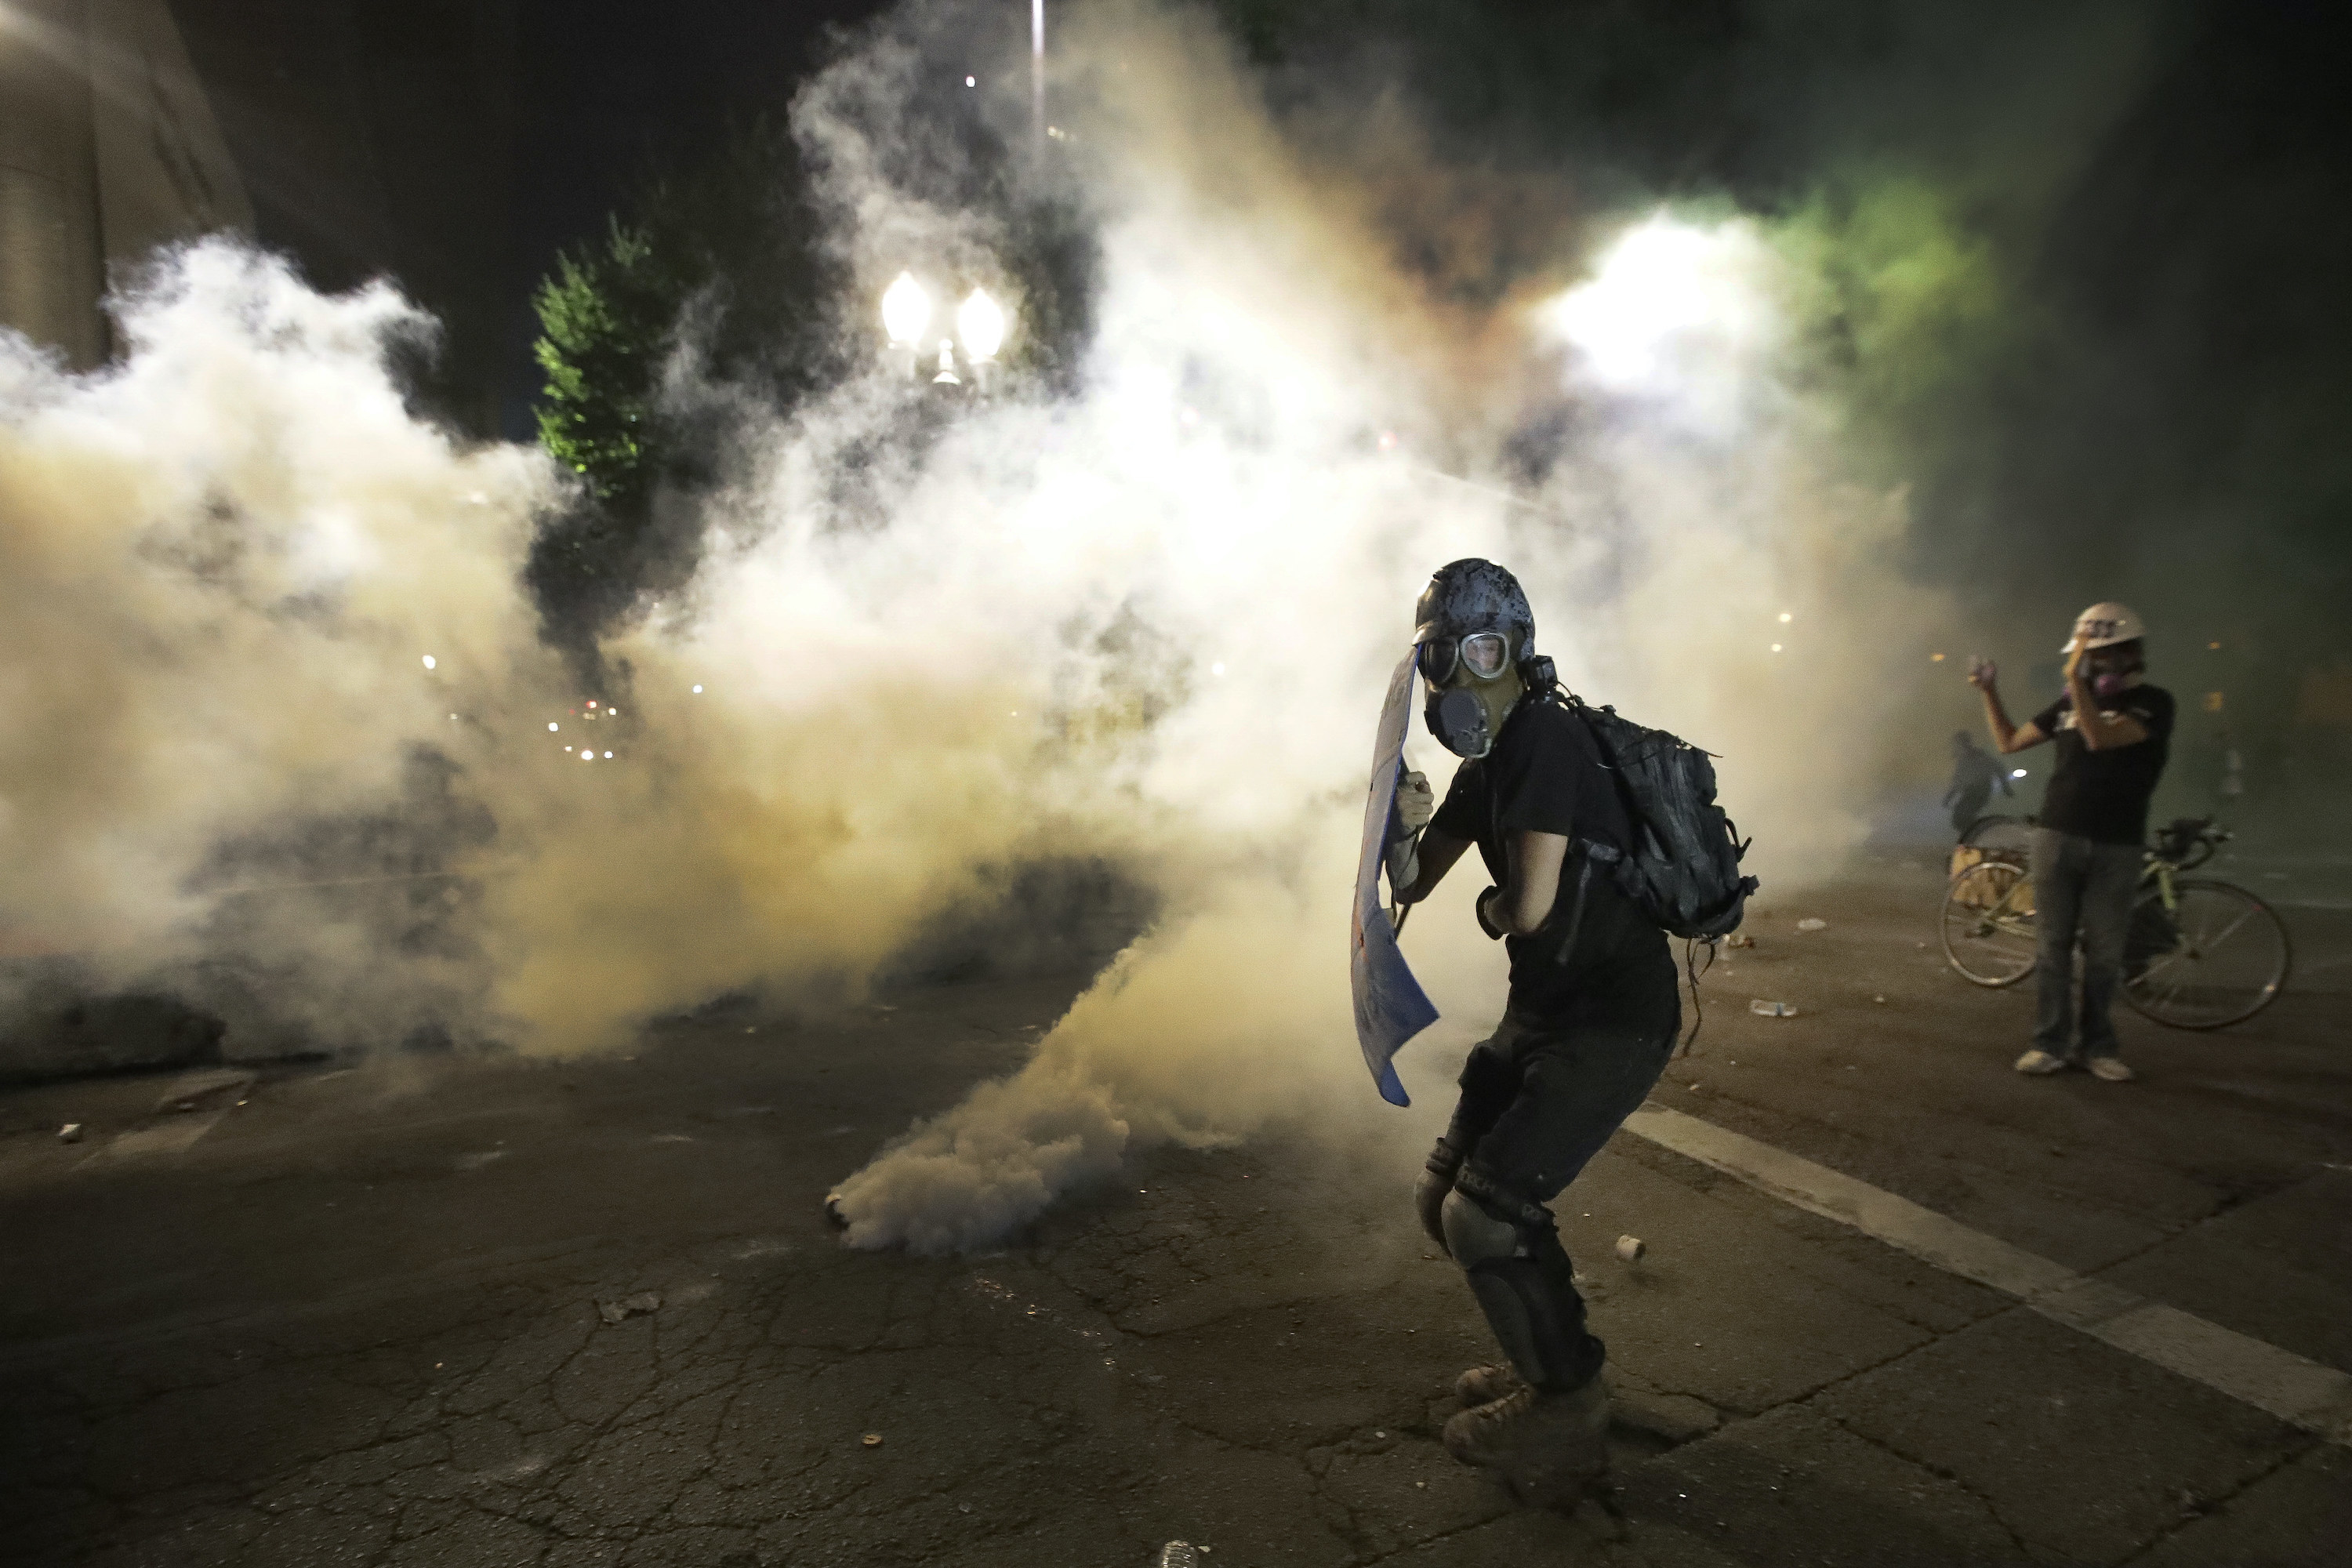 A protester holding a shield and wearing a gas mask hides from clouds of tear gas